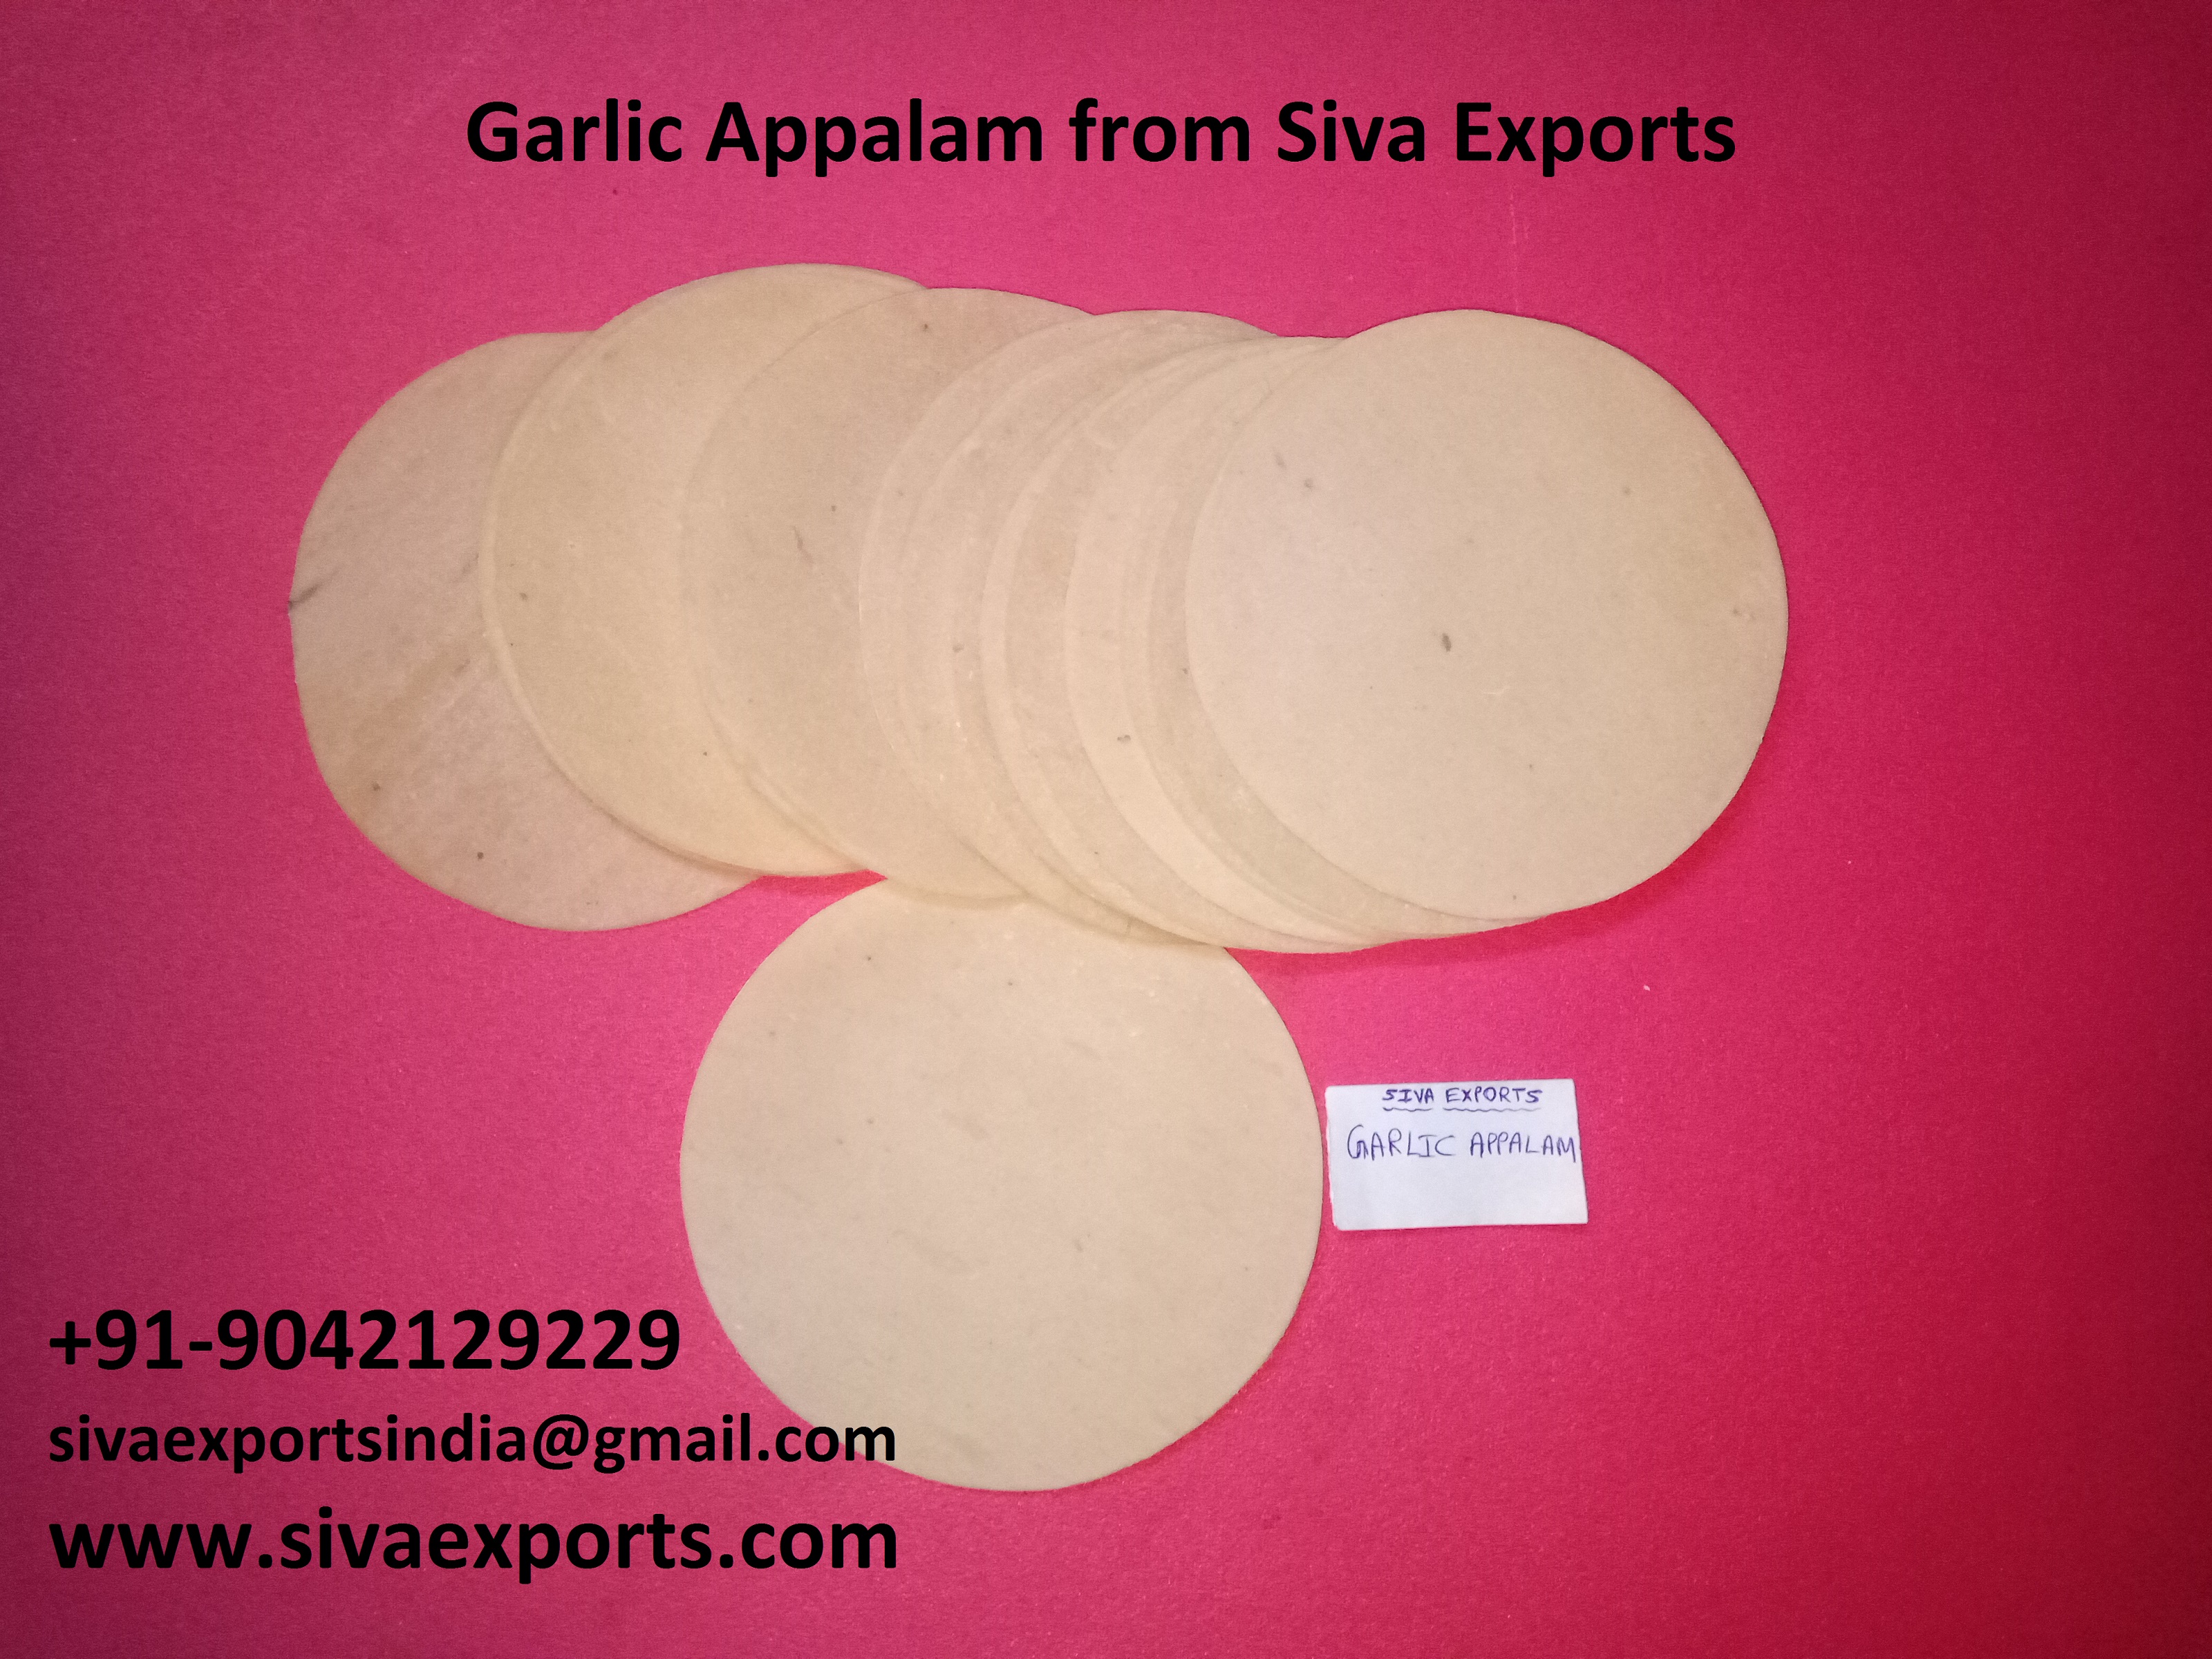 appalam manufacturers in india, papad manufacturers in india, appalam manufacturers in tamilnadu, papad manufacturers in tamilnadu, appalam manufacturers in madurai, papad manufacturers in madurai, appalam exporters in india, papad exporters in india, appalam exporters in tamilnadu, papad exporters in tamilnadu, appalam exporters in madurai, papad exporters in madurai, appalam wholesalers in india, papad wholesalers in india, appalam wholesalers in tamilnadu, papad wholesalers in tamilnadu, appalam wholesalers in madurai, papad wholesalers in madurai, appalam distributors in india, papad distributors in india, appalam distributors in tamilnadu, papad distributors in tamilnadu, appalam distributors in madurai, papad distributors in madurai, appalam suppliers in india, papad suppliers in india, appalam suppliers in tamilnadu, papad suppliers in tamilnadu, appalam suppliers in madurai, papad suppliers in madurai, appalam dealers in india, papad dealers in india, appalam dealers in tamilnadu, papad dealers in tamilnadu, appalam dealers in madurai, papad dealers in madurai, appalam companies in india, appalam companies in tamilnadu, appalam companies in madurai, papad companies in india, papad companies in tamilnadu, papad companies in madurai, appalam company in india, appalam company in tamilnadu, appalam company in madurai, papad company in india, papad company in tamilnadu, papad company in madurai, appalam factory in india, appalam factory in tamilnadu, appalam factory in madurai, papad factory in india, papad factory in tamilnadu, papad factory in madurai, appalam factories in india, appalam factories in tamilnadu, appalam factories in madurai, papad factories in india, papad factories in tamilnadu, papad factories in madurai, appalam production units in india, appalam production units in tamilnadu, appalam production units in madurai, papad production units in india, papad production units in tamilnadu, papad production units in madurai, pappadam manufacturers in india, poppadom manufacturers in india, pappadam manufacturers in tamilnadu, poppadom manufacturers in tamilnadu, pappadam manufacturers in madurai, poppadom manufacturers in madurai, appalam manufacturers, papad manufacturers, pappadam manufacturers, pappadum exporters in india, pappadam exporters in india, poppadom exporters in india, pappadam exporters in tamilnadu, pappadum exporters in tamilnadu, poppadom exporters in tamilnadu, pappadum exporters in madurai, pappadam exporters in madurai, poppadom exporters in Madurai, pappadum wholesalers in madurai, pappadam wholesalers in madurai, poppadom wholesalers in Madurai, pappadum wholesalers in tamilnadu, pappadam wholesalers in tamilnadu, poppadom wholesalers in Tamilnadu, pappadam wholesalers in india, poppadom wholesalers in india, pappadum wholesalers in india, appalam retailers in india, papad retailers in india, appalam retailers in tamilnadu, papad retailers in tamilnadu, appalam retailers in madurai, papad retailers in Madurai, appalam, papad, Siva Exports, Orange Appalam, Orange Papad, Lion Brand Appalam, Siva Appalam, Lion brand Papad, Sivan Appalam, Orange Pappadam, appalam, papad, papadum, papadam, papadom, pappad, pappadum, pappadam, pappadom, poppadom, popadom, poppadam, popadam, poppadum, popadum, appalam manufacturers, papad manufacturers, papadum manufacturers, papadam manufacturers, pappadam manufacturers, pappad manufacturers, pappadum manufacturers, pappadom manufacturers, poppadom manufacturers, papadom manufacturers, popadom manufacturers, poppadum manufacturers, popadum manufacturers, popadam manufacturers, poppadam manufacturers, cumin appalam, red chilli appalam, green chilli appalam, pepper appalam, garmic appalam, calcium appalam, plain appalam manufacturers in india,tamilnadu,madurai, Appalam manufacturers in Andaman and Nicobar Islands, Best Appalam manufacturers in Andaman and Nicobar Islands, No.1 Appalam manufacturers in Andaman and Nicobar Islands, Handmade Appalam manufacturers in Andaman and Nicobar Islands, Top 100 Appalam manufacturers in Andaman and Nicobar Islands, Leading Appalam manufacturers in Andaman and Nicobar Islands, Green Chilli Appalam manufacturers in Andaman and Nicobar Islands, Red Chilli Appalam manufacturers in Andaman and Nicobar Islands, Plain Appalam manufacturers in Andaman and Nicobar Islands, Cumin Appalam manufacturers in Andaman and Nicobar Islands, Pepper Appalam manufacturers in Andaman and Nicobar Islands, Garlic Appalam manufacturers in Andaman and Nicobar Islands, List of Appalam manufacturers in Andaman and Nicobar Islands